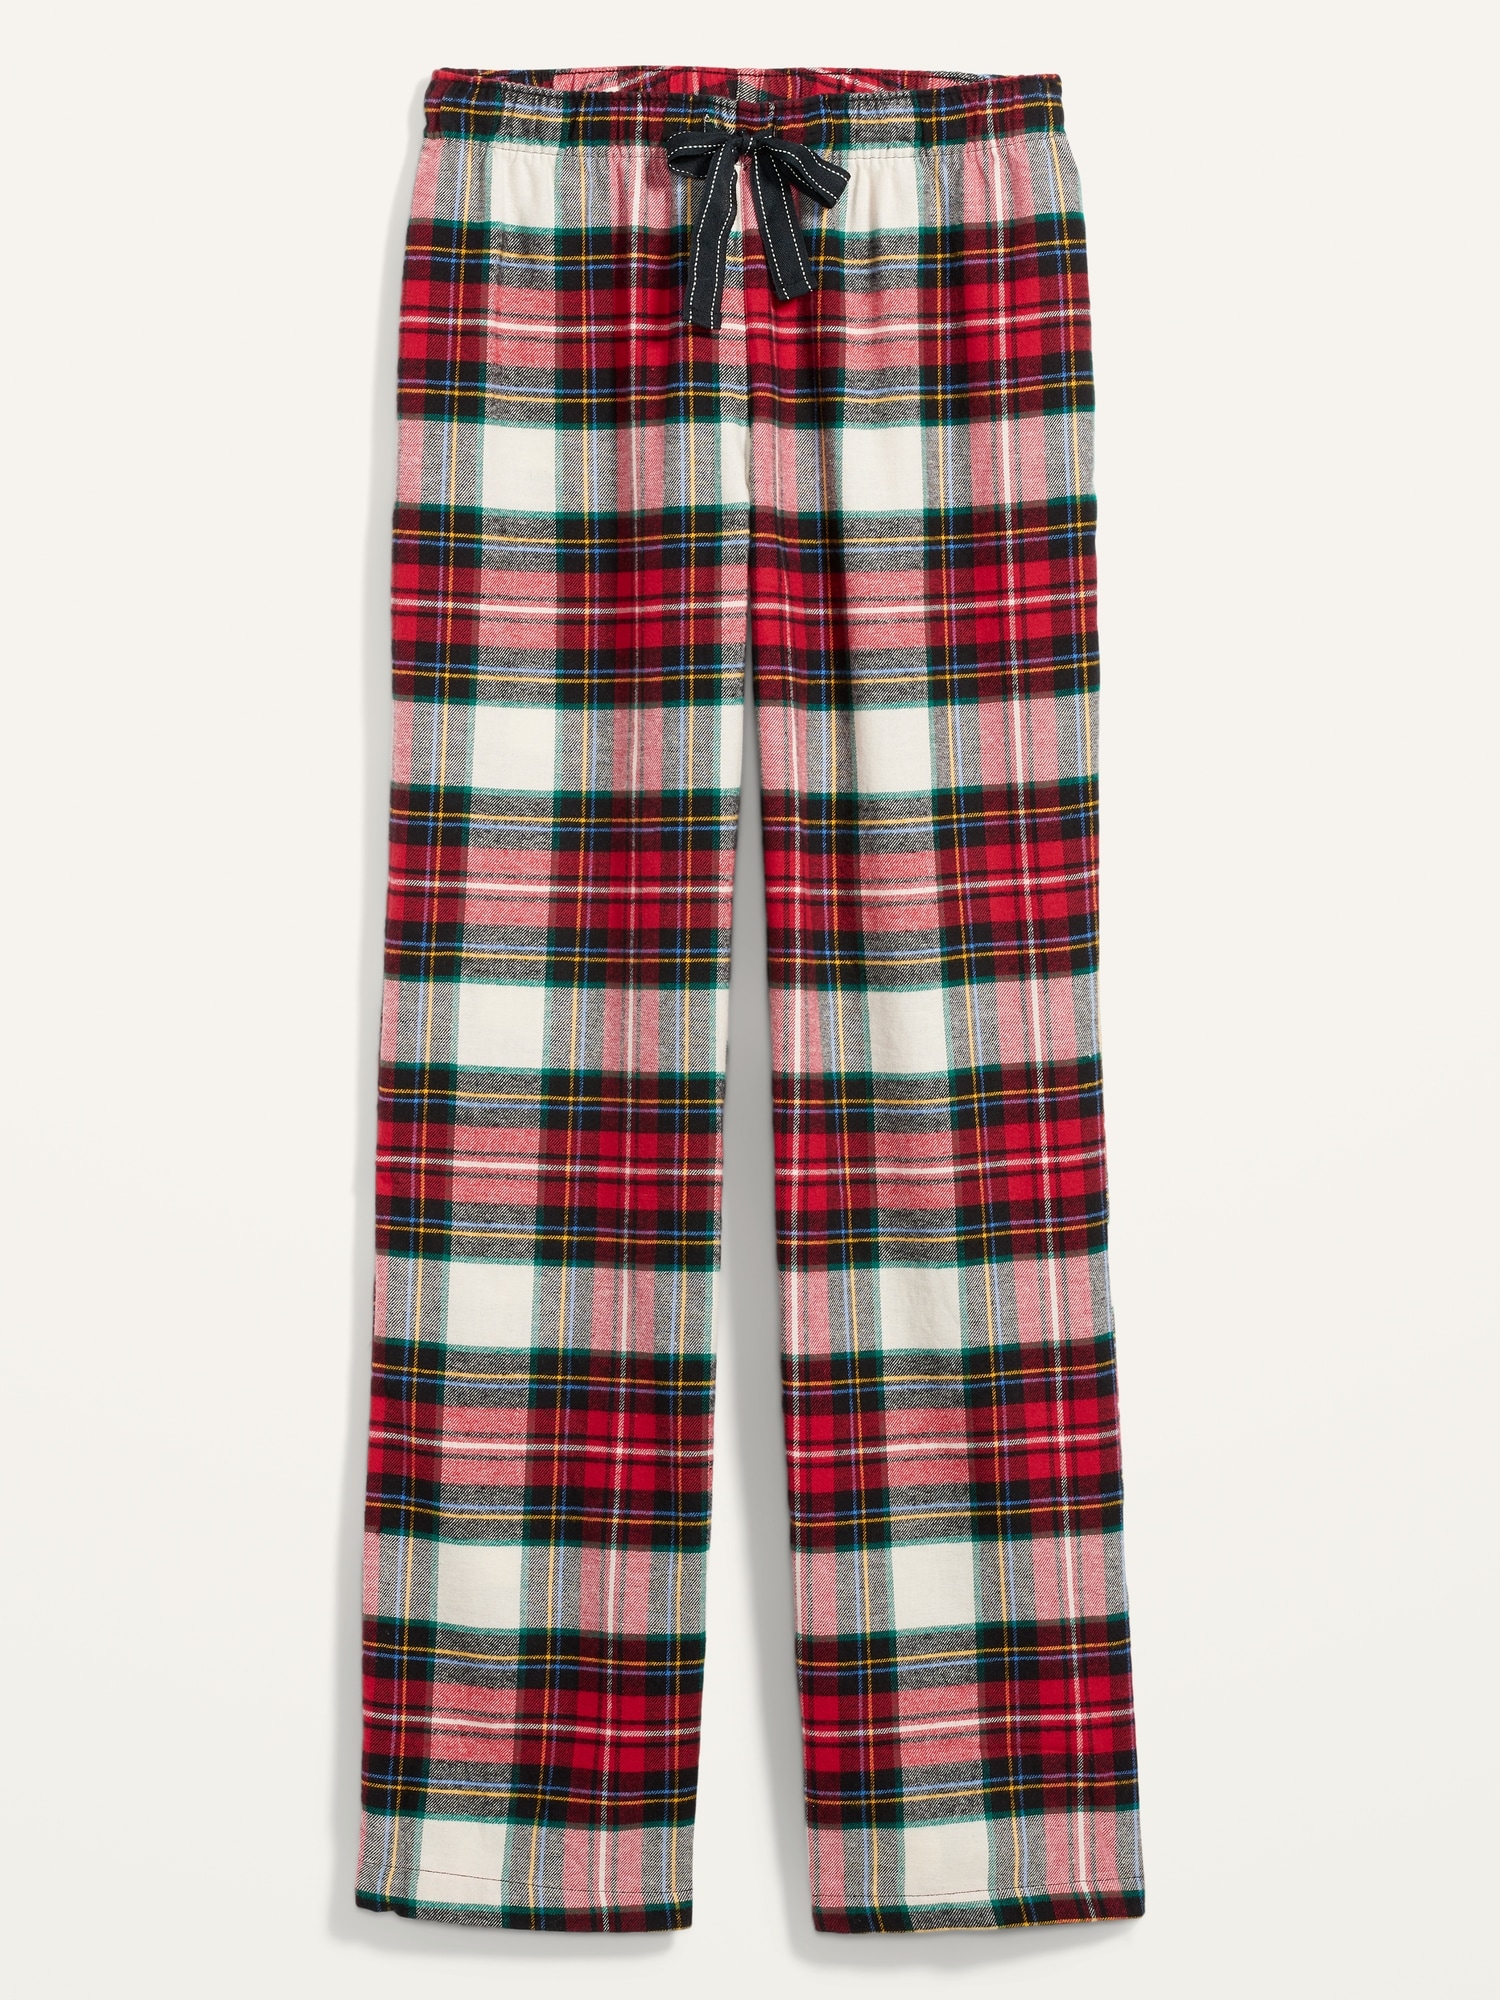 Patterned Flannel Pajama Pants for Women | Old Navy